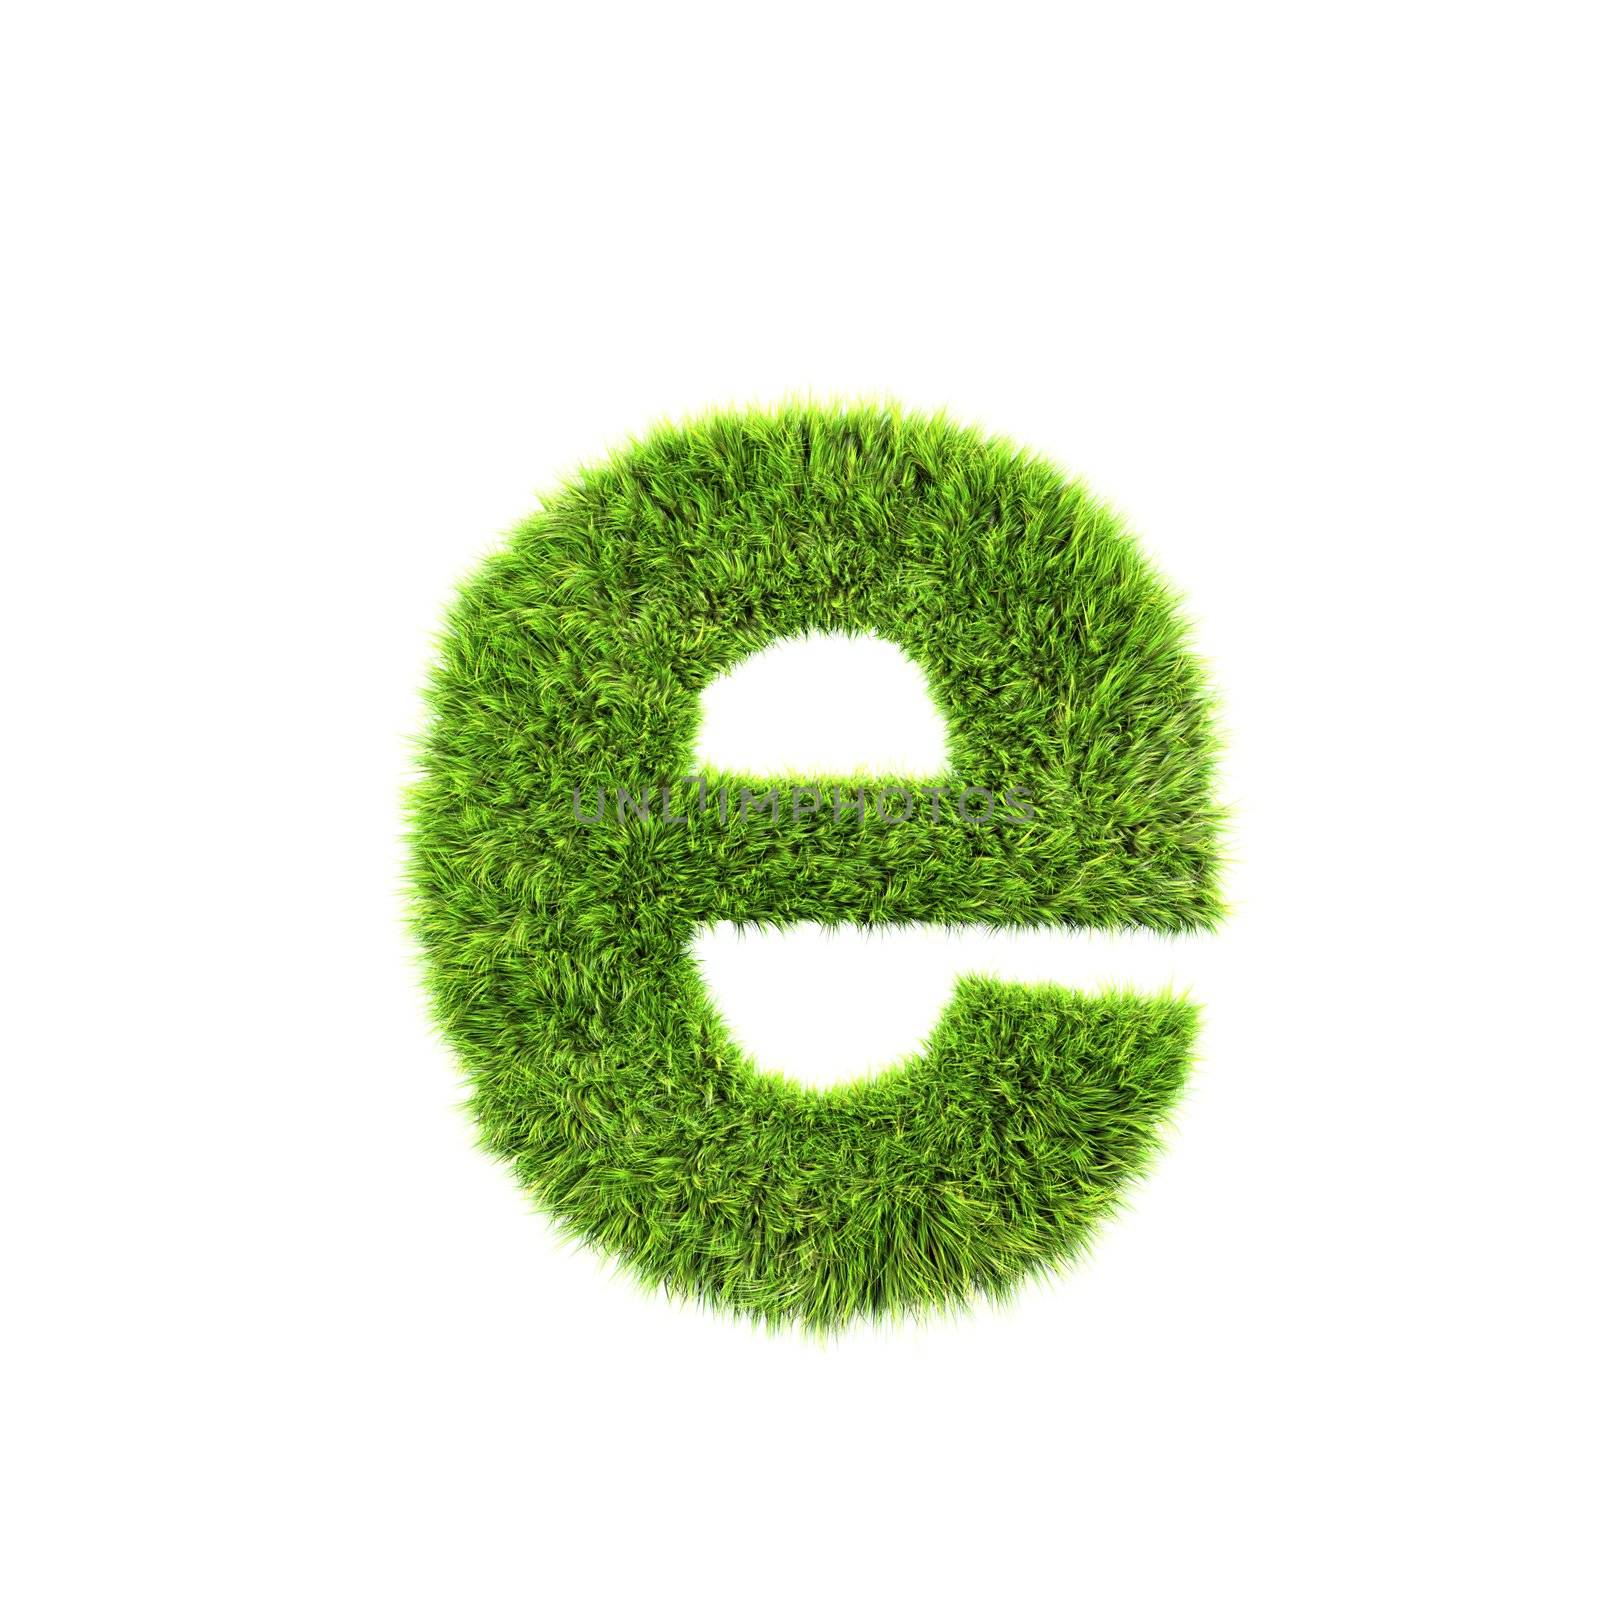 3d grass letter isolated on white background - e